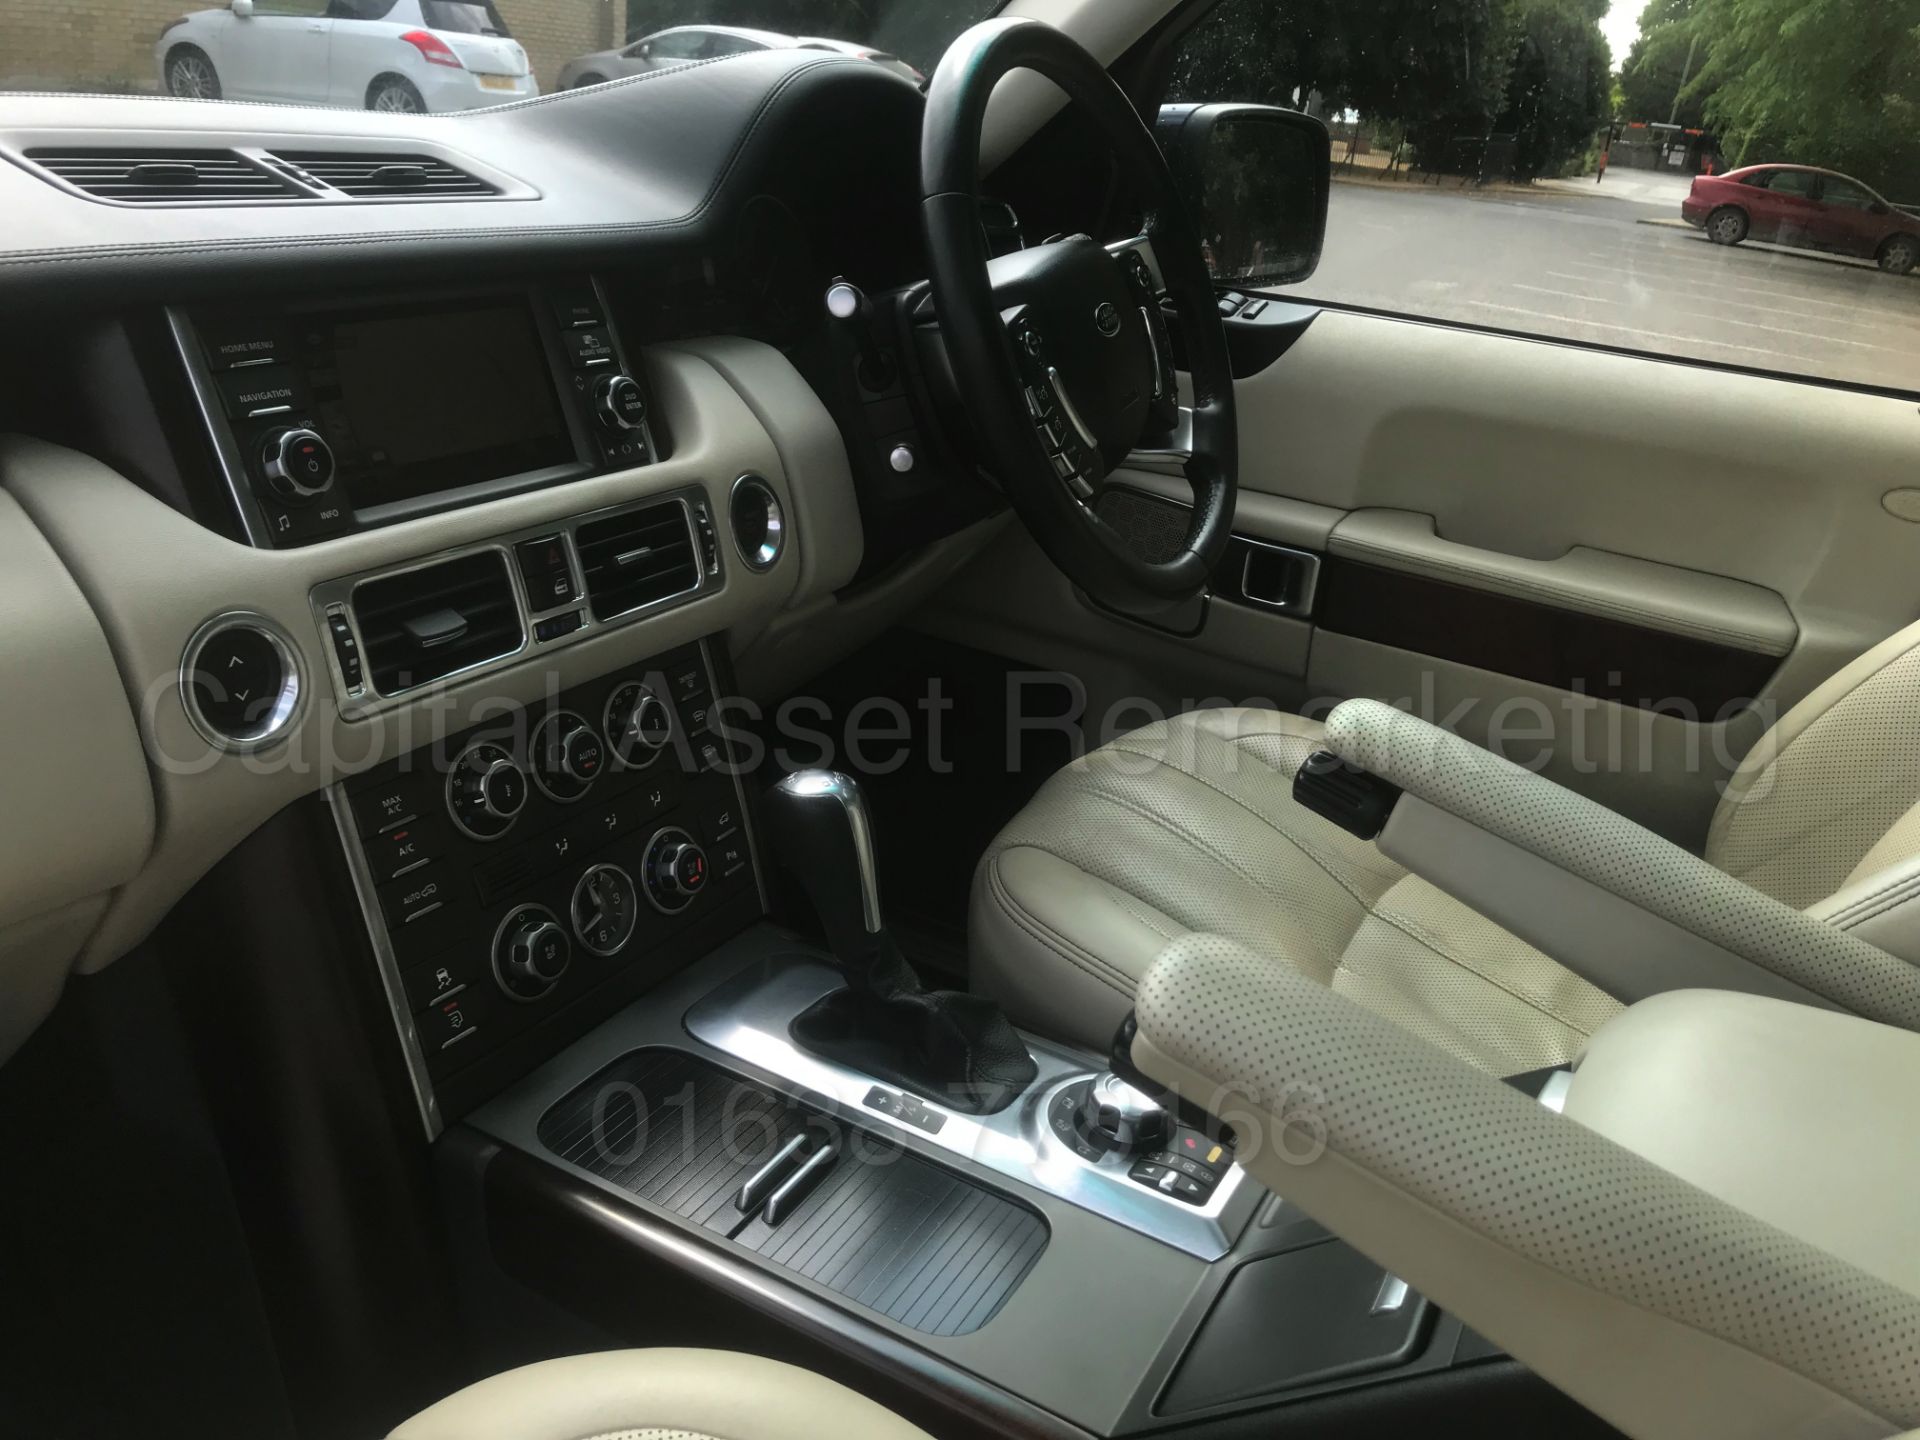 (On Sale) RANGE ROVER VOGUE **SE EDITION** (2010 - FACELIFT EDITION) 'TDV8 - 268 BHP - AUTO' **WOW** - Image 31 of 62